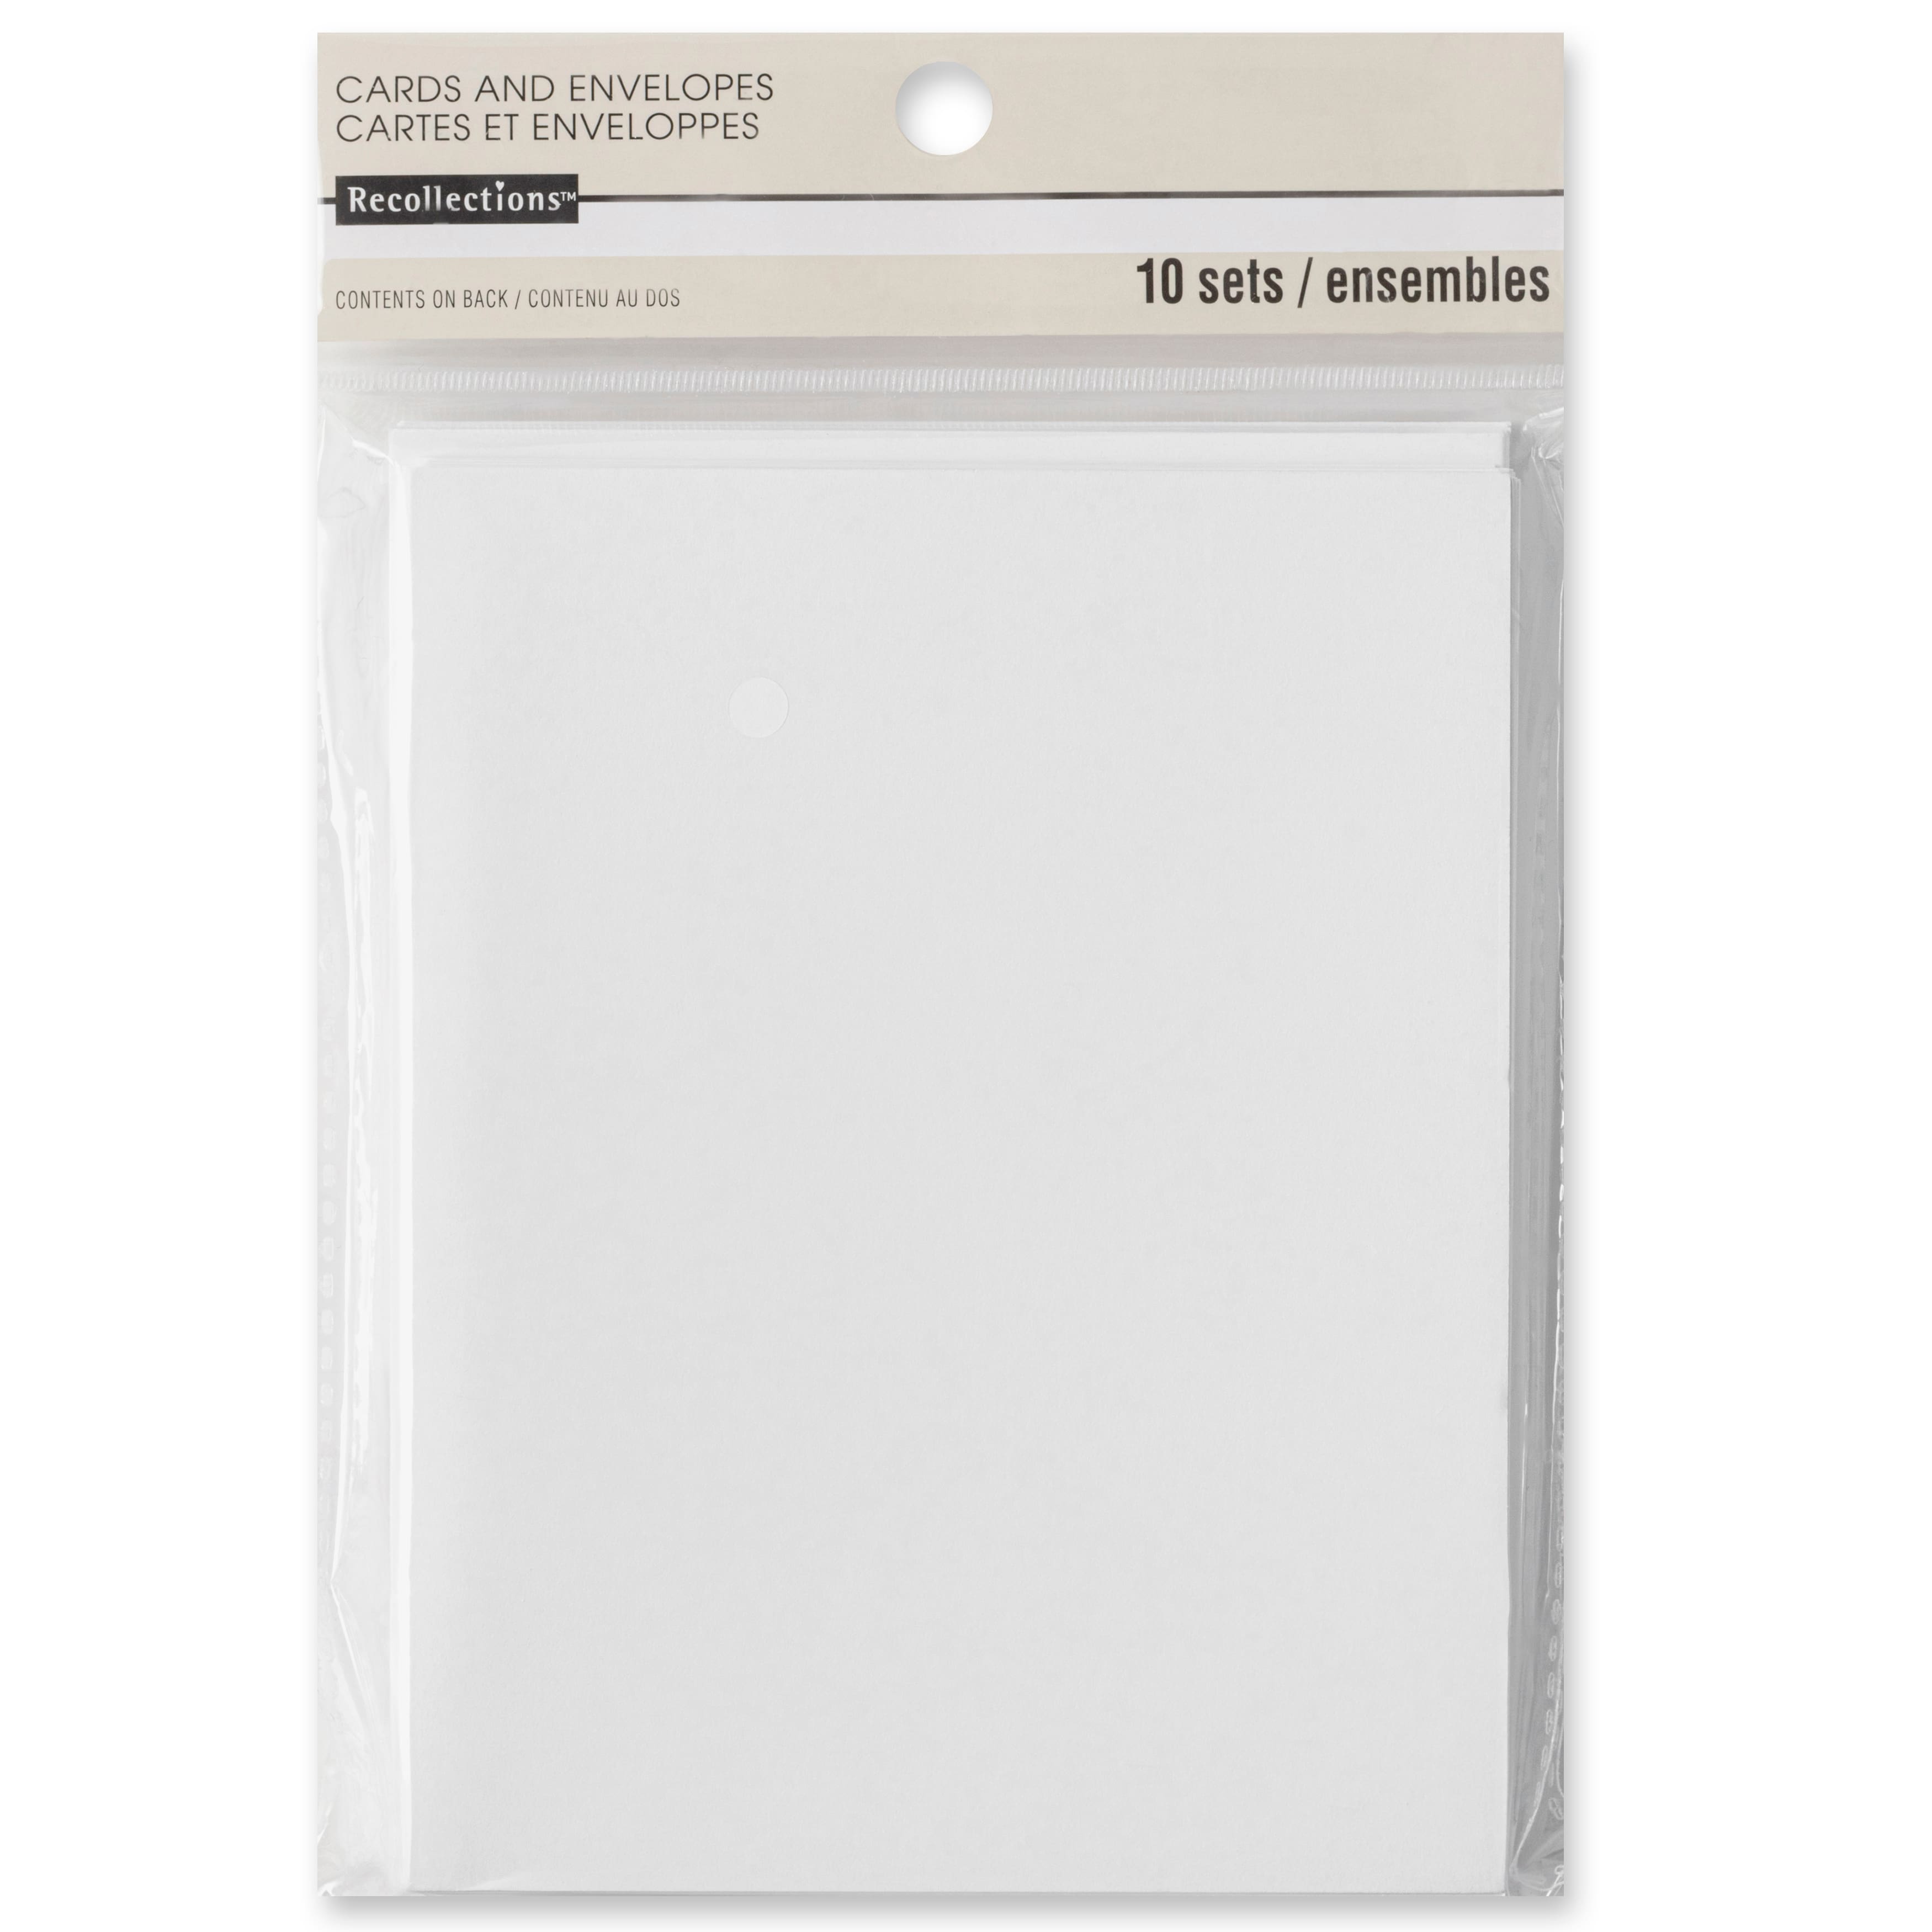 Recollections BLANK WHITE Cards & Envelopes for card making Value